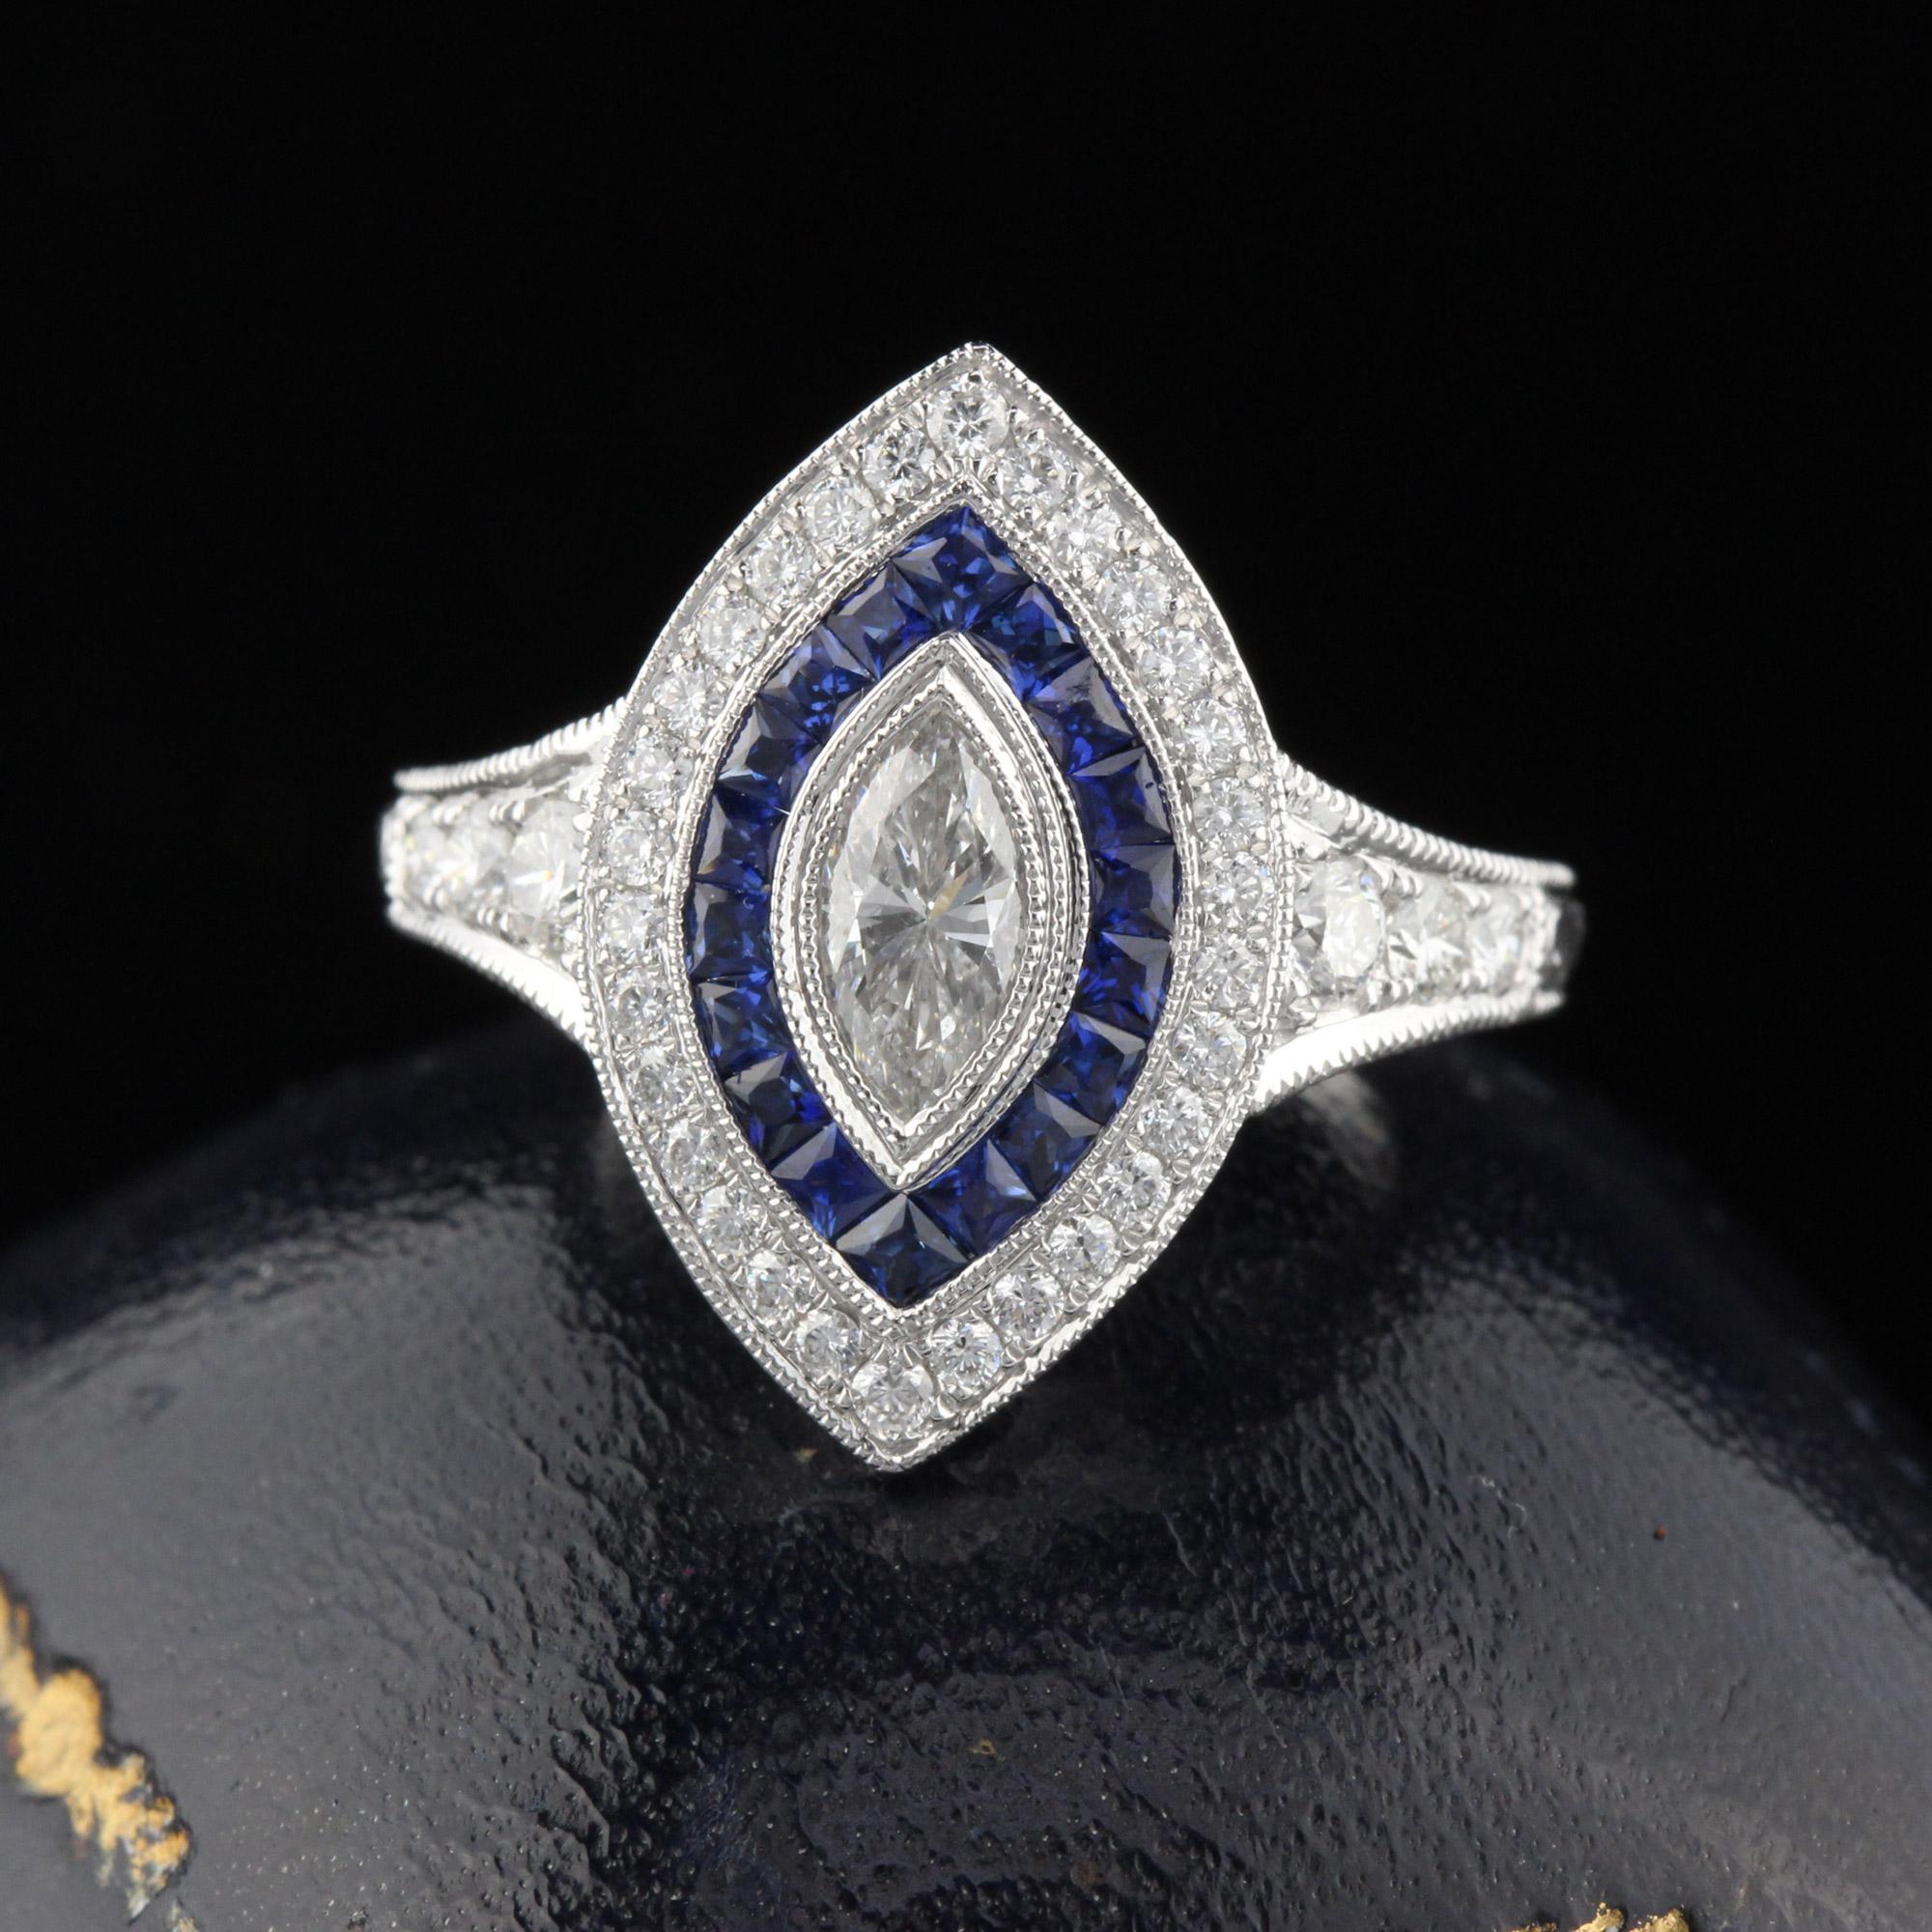 Beautiful Art Deco style ring in 18K White Gold with GIA Marquise shaped diamond and channel set natural sapphires! This ring is hand engraved and mil-grained. 

Item #R0046

Metal: 18K White Gold

Center Diamond Weight: 0.58cts

Center Diamond